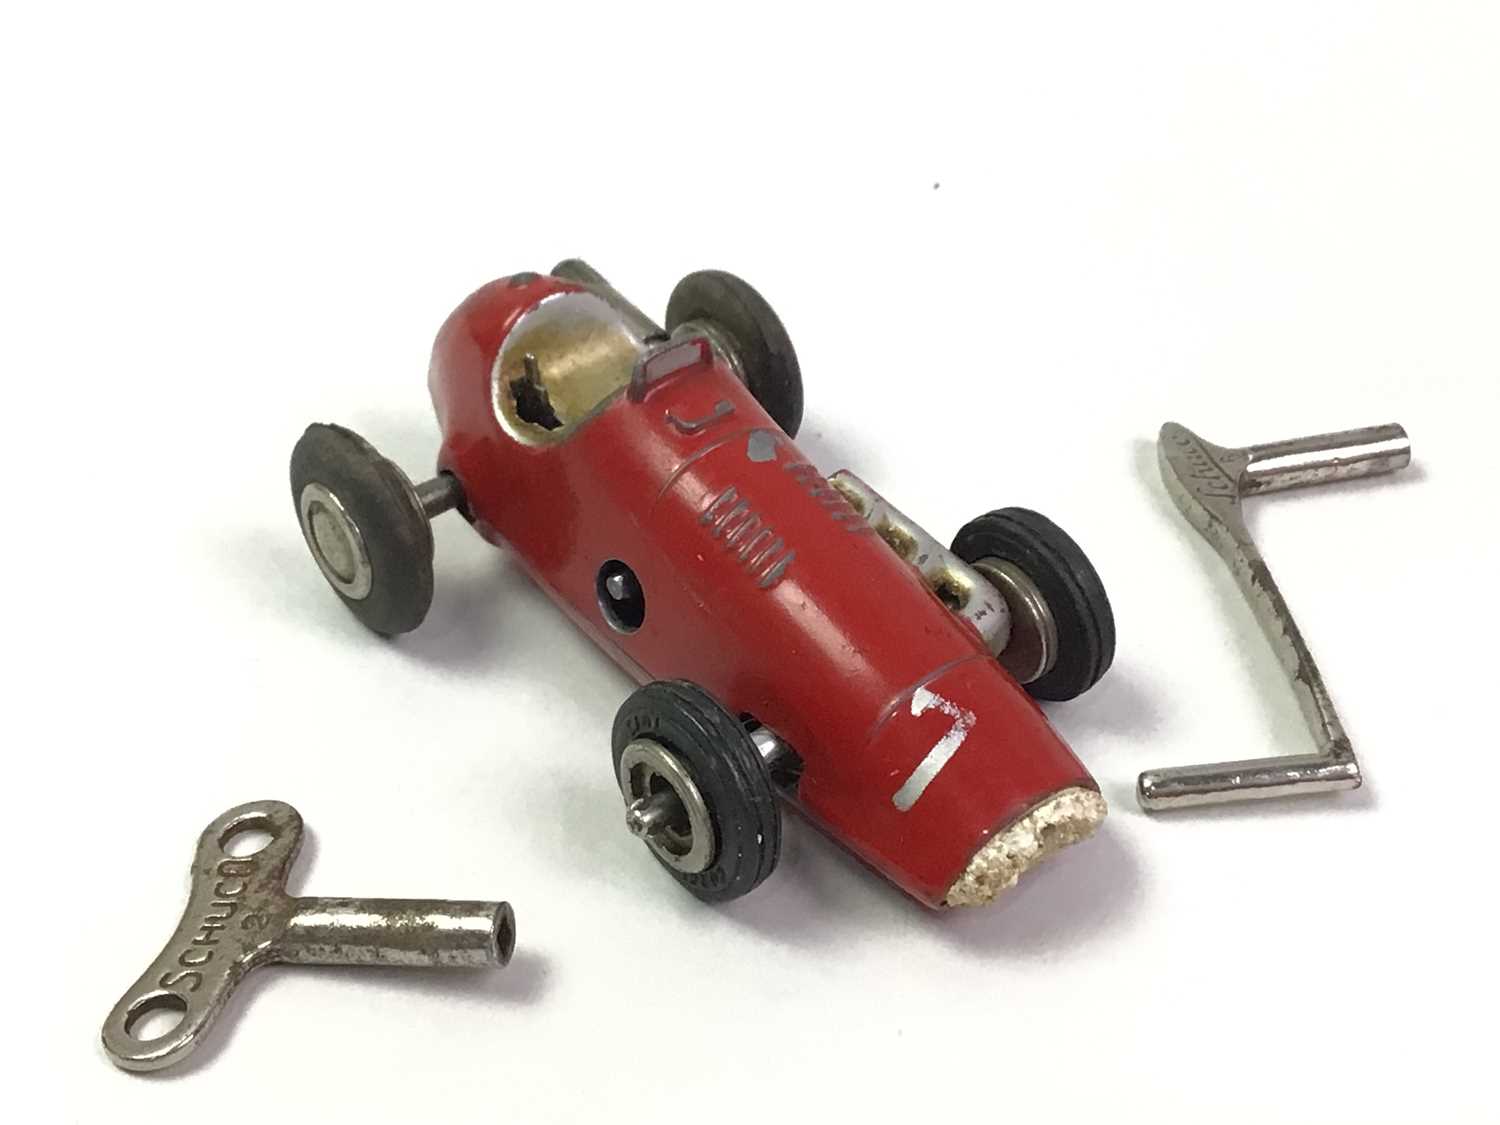 SCHUCO MICRO RACER WIND UP MODEL CAR, - Image 2 of 2